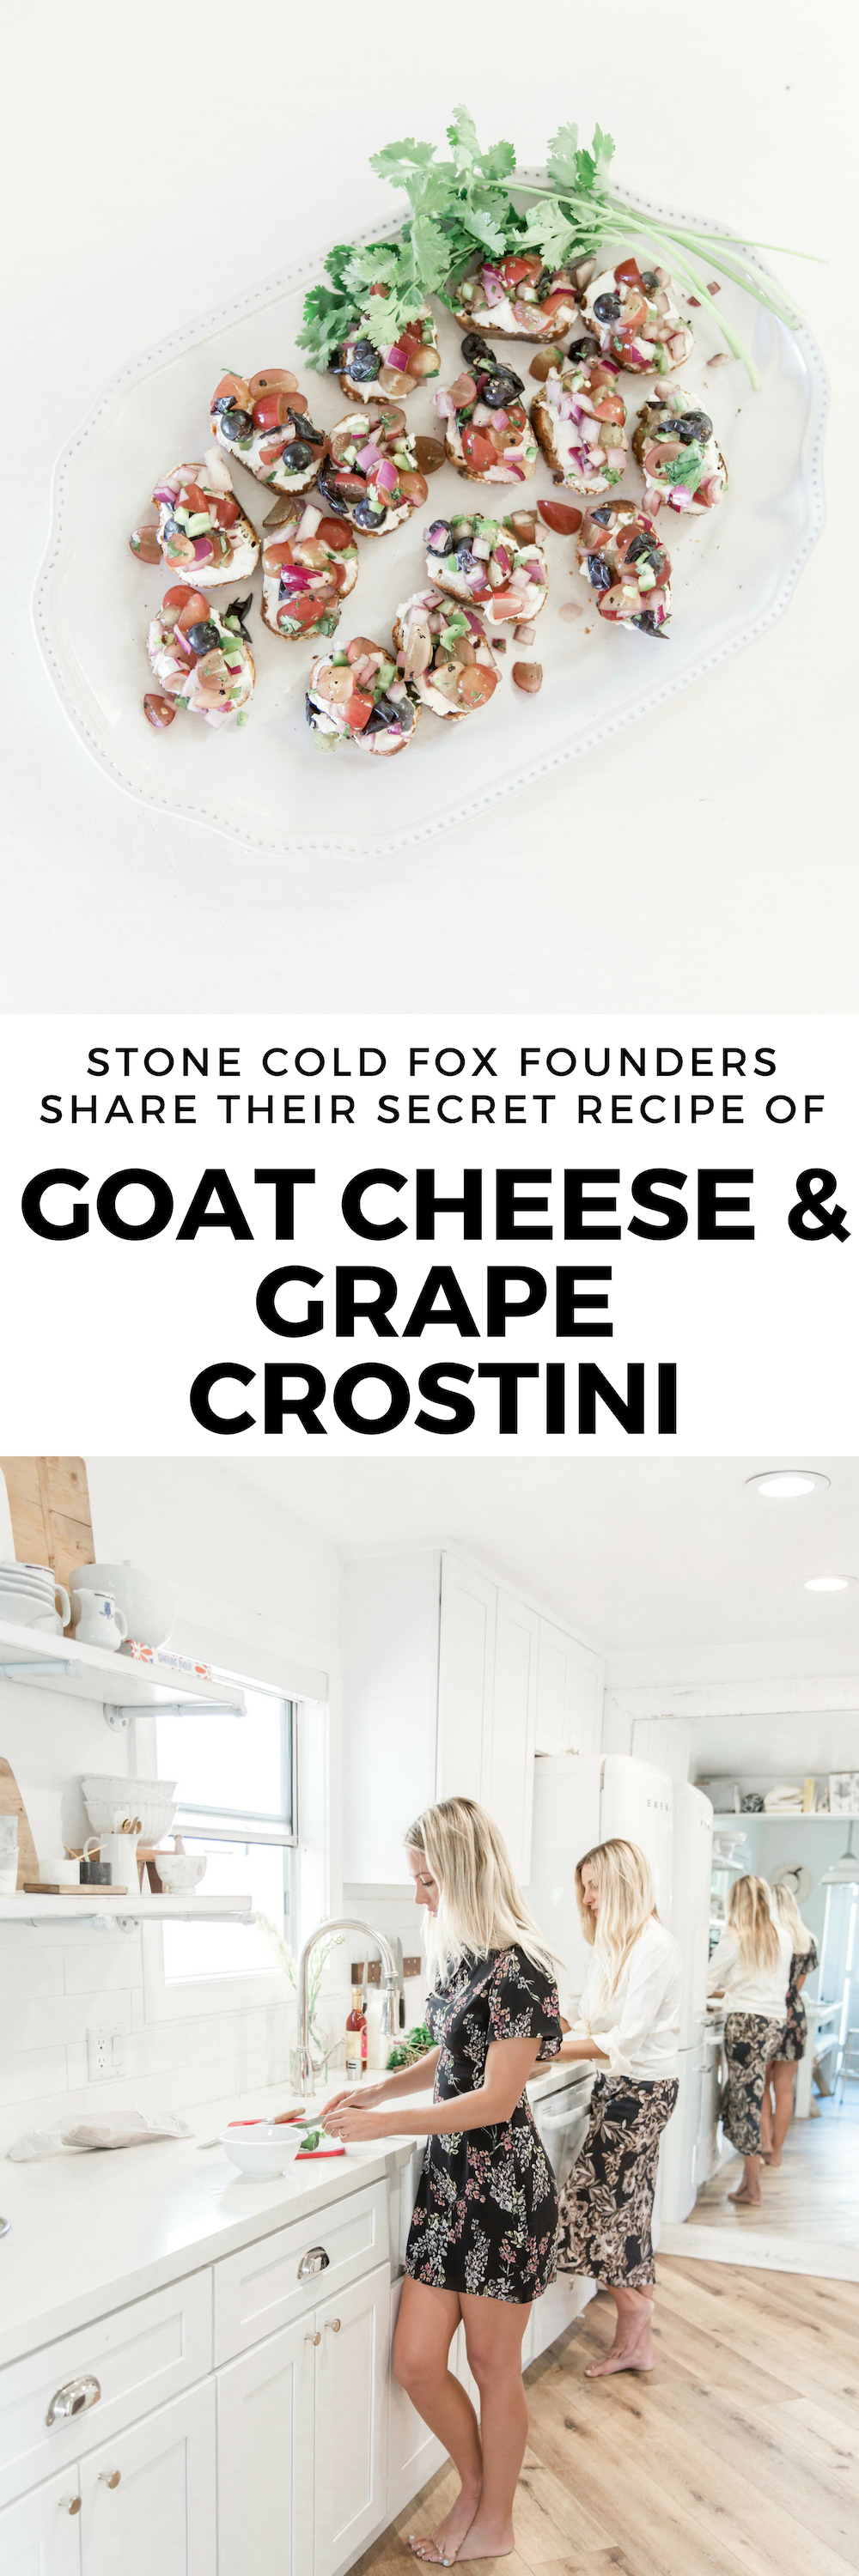 STONE COLD FOX FOUNDERS SHARE THEIR SECRET RECIPE OF Goat Cheese Grape Crostinis